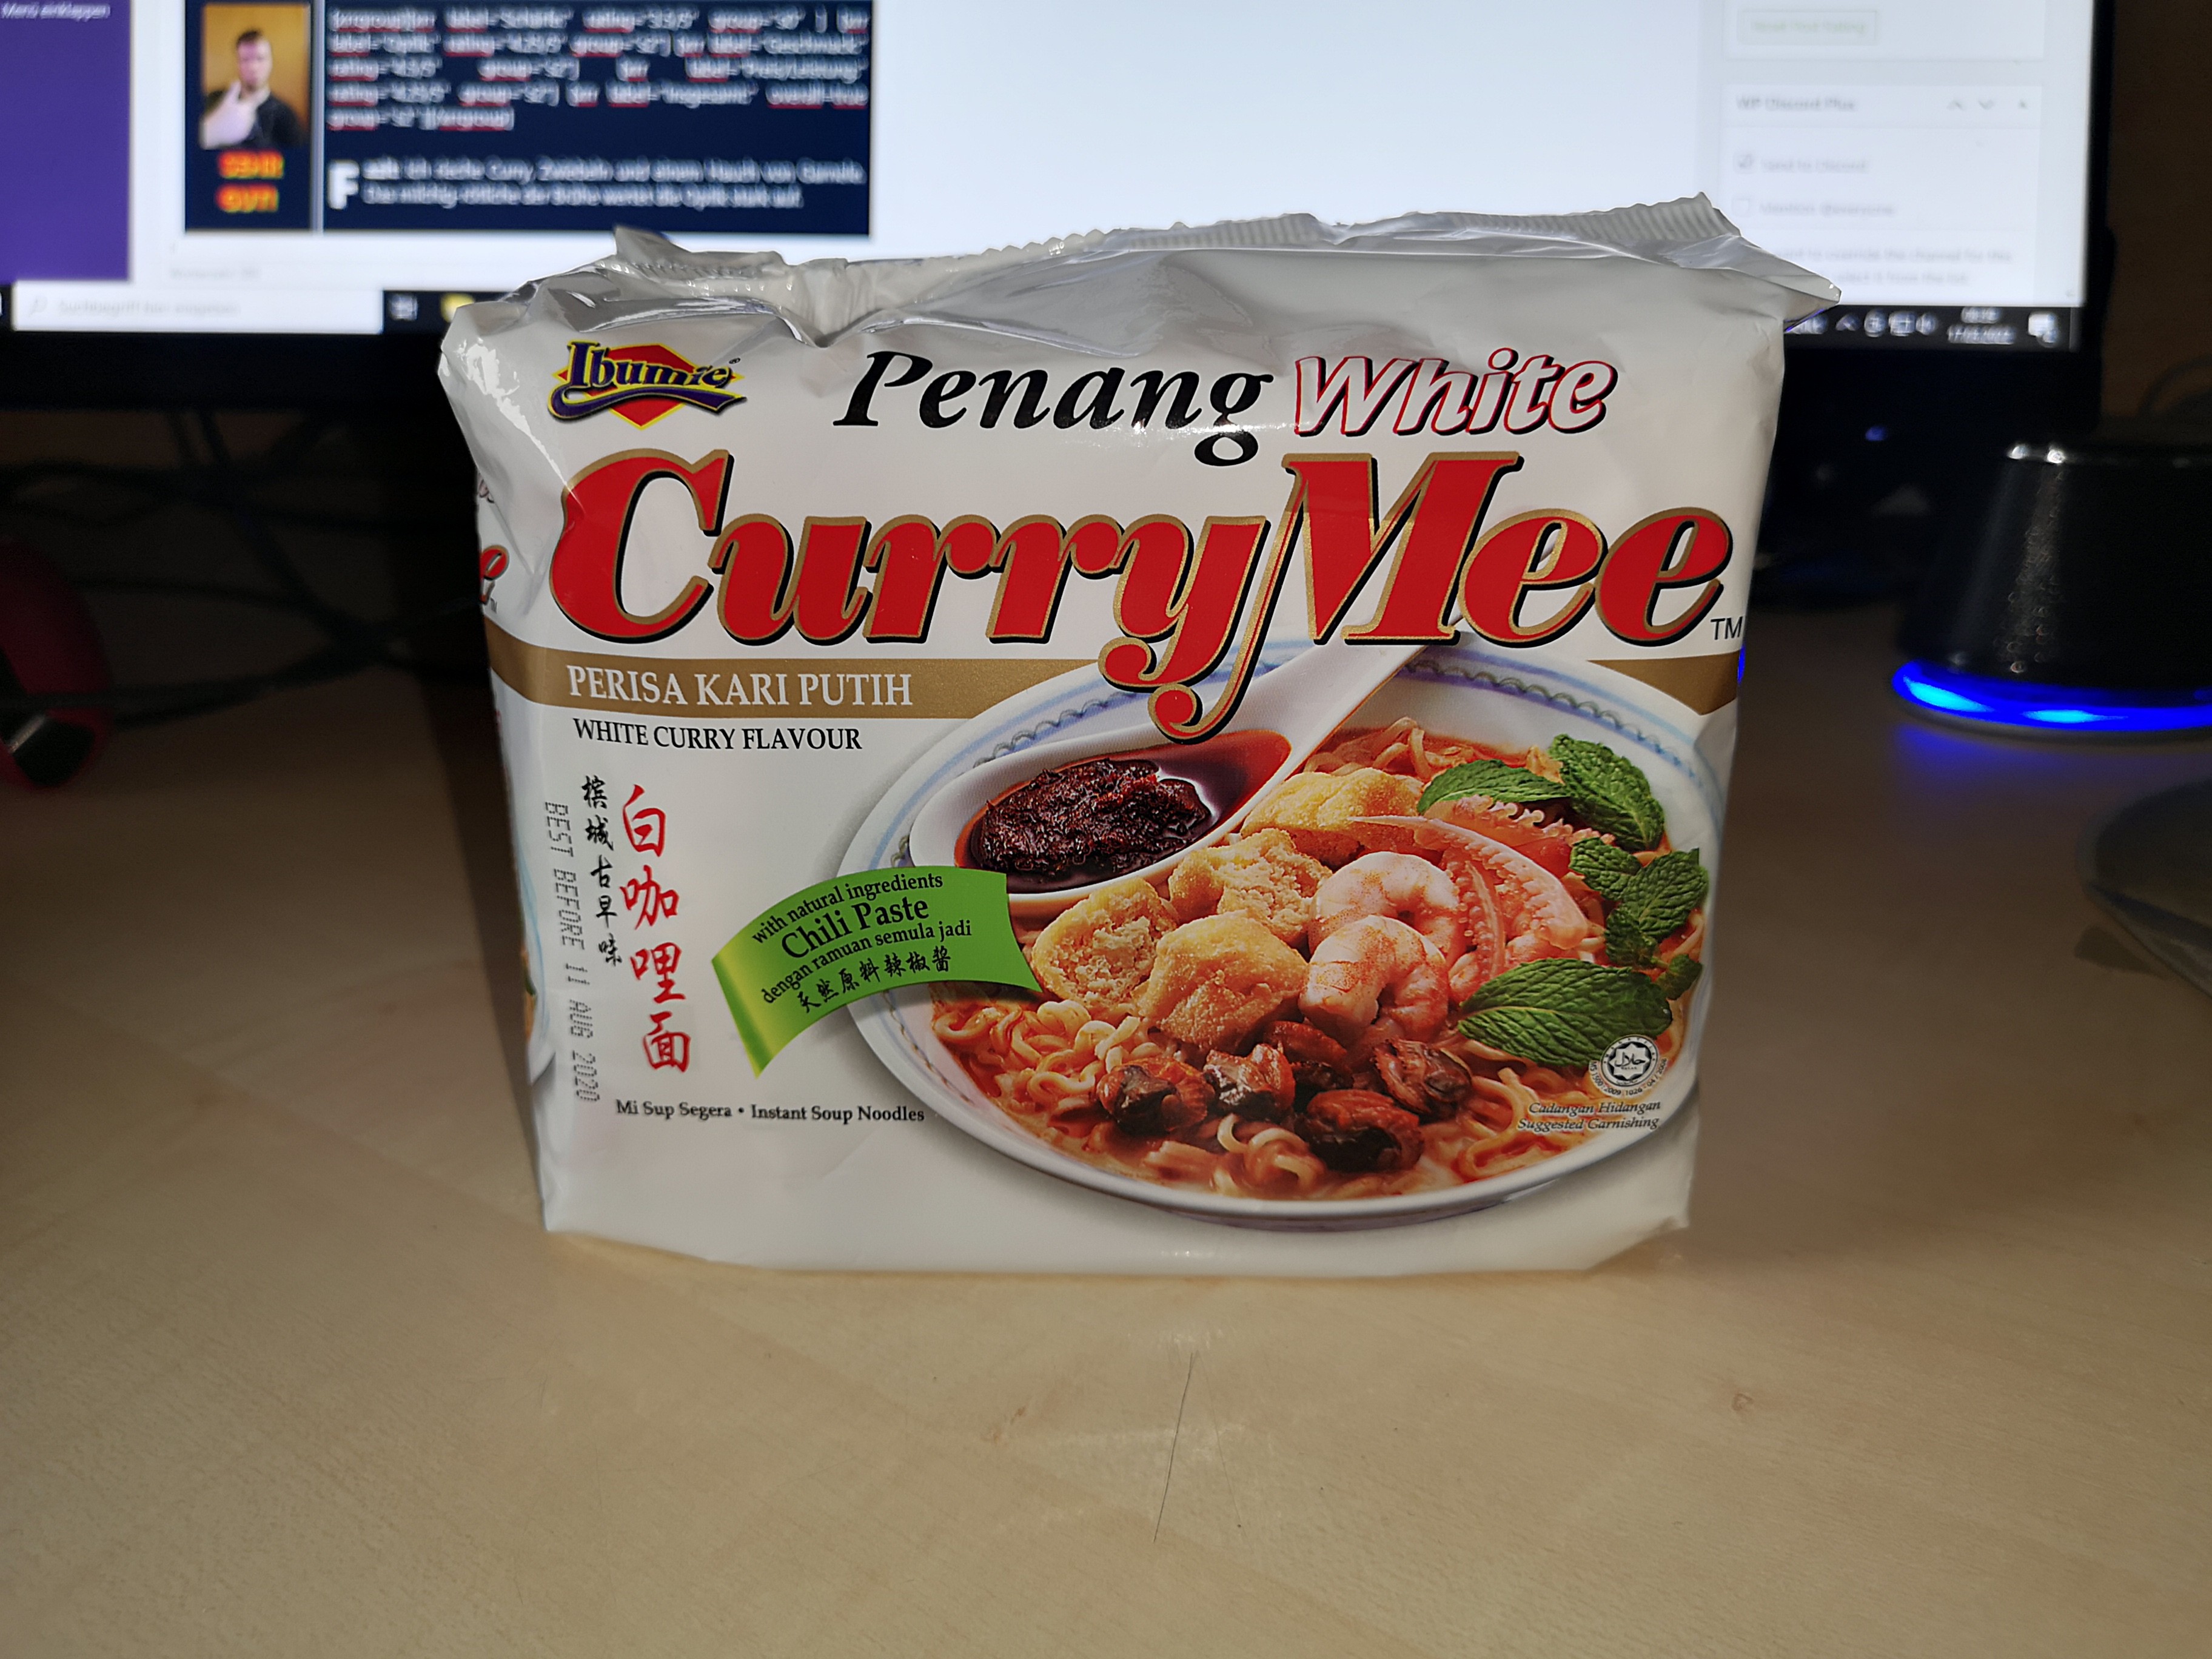 #2088: Ibumie "Penang White CurryMee" (White Curry Flavour) (Update 2022)